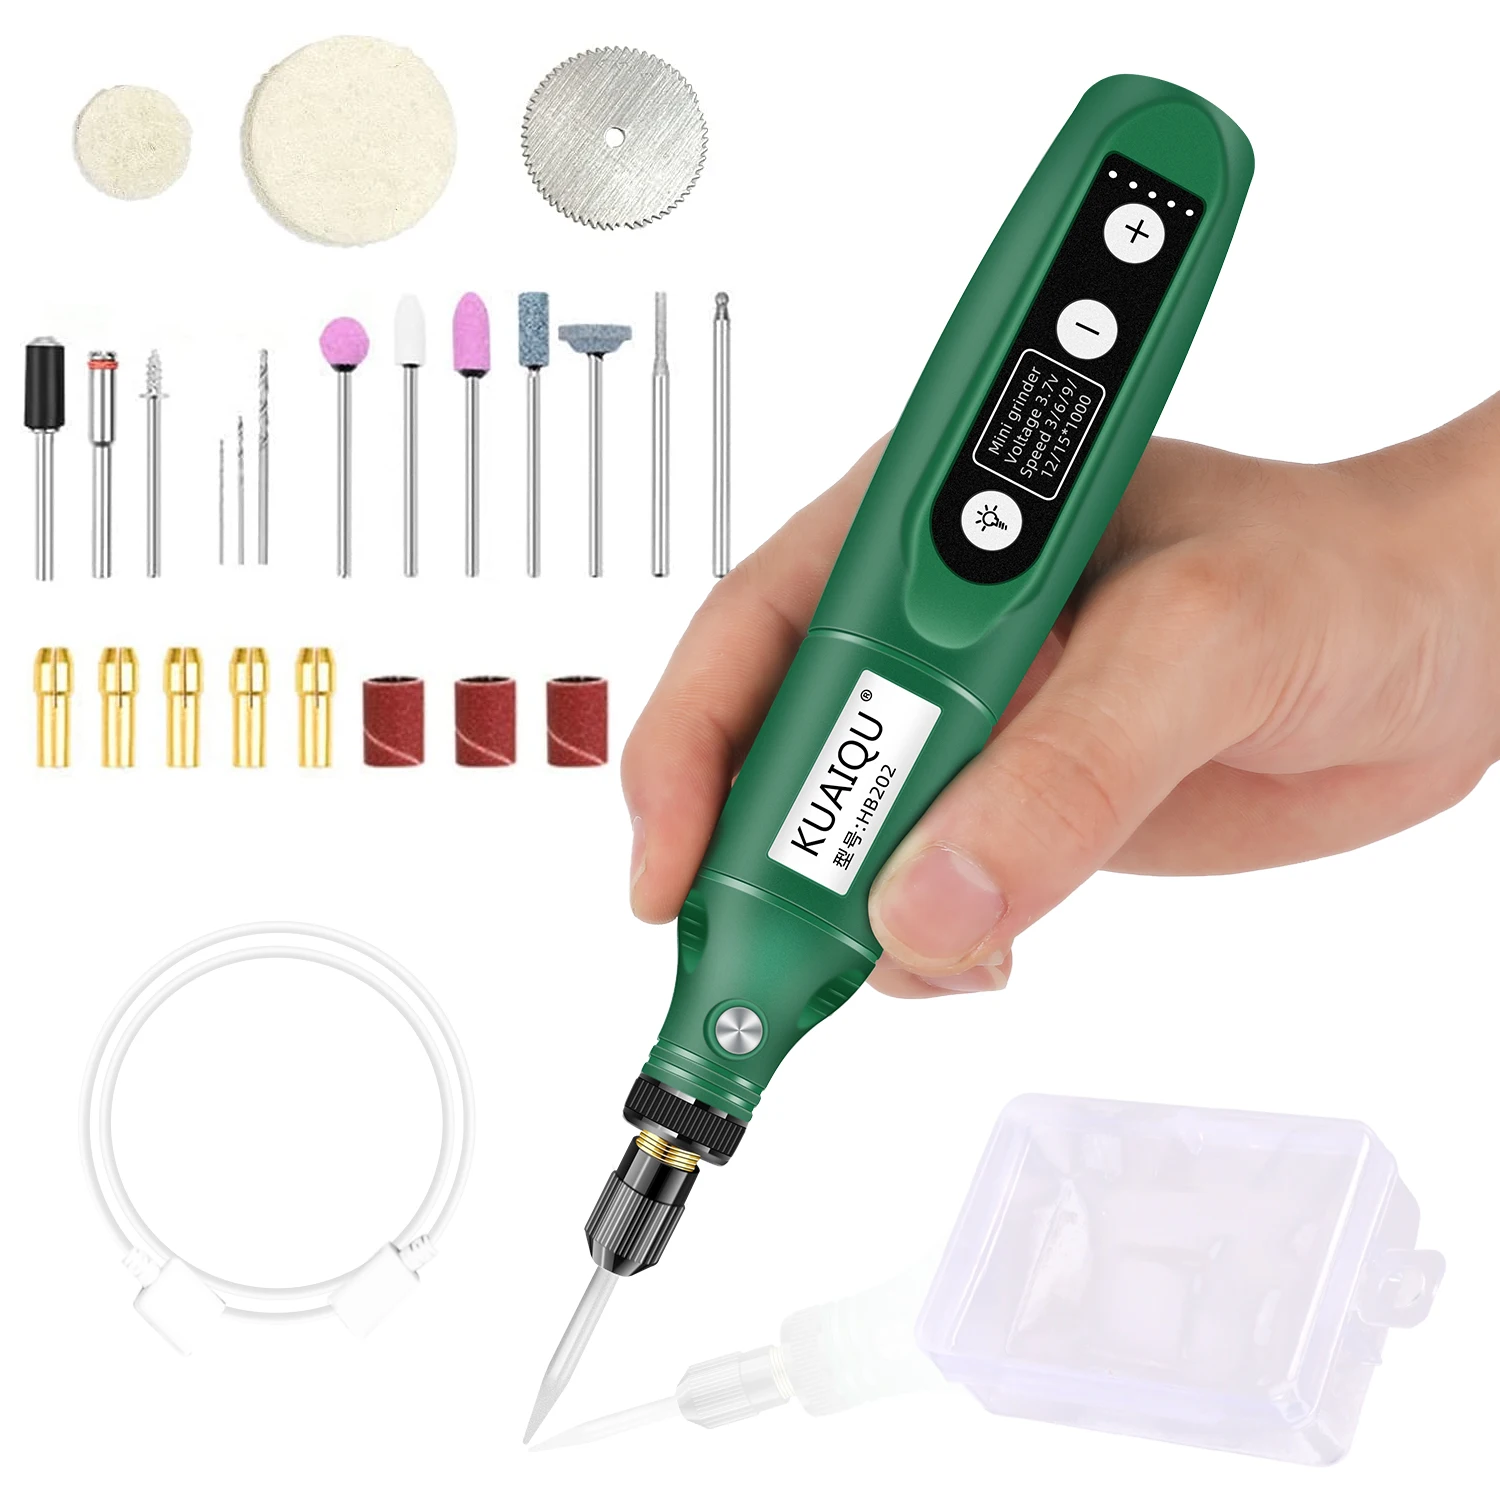 

HB-202 Variable Speed Mini Grinder Set USB Charging Electric Drill Engraving Pen Rotary Tool for Polishing Carving Sanding